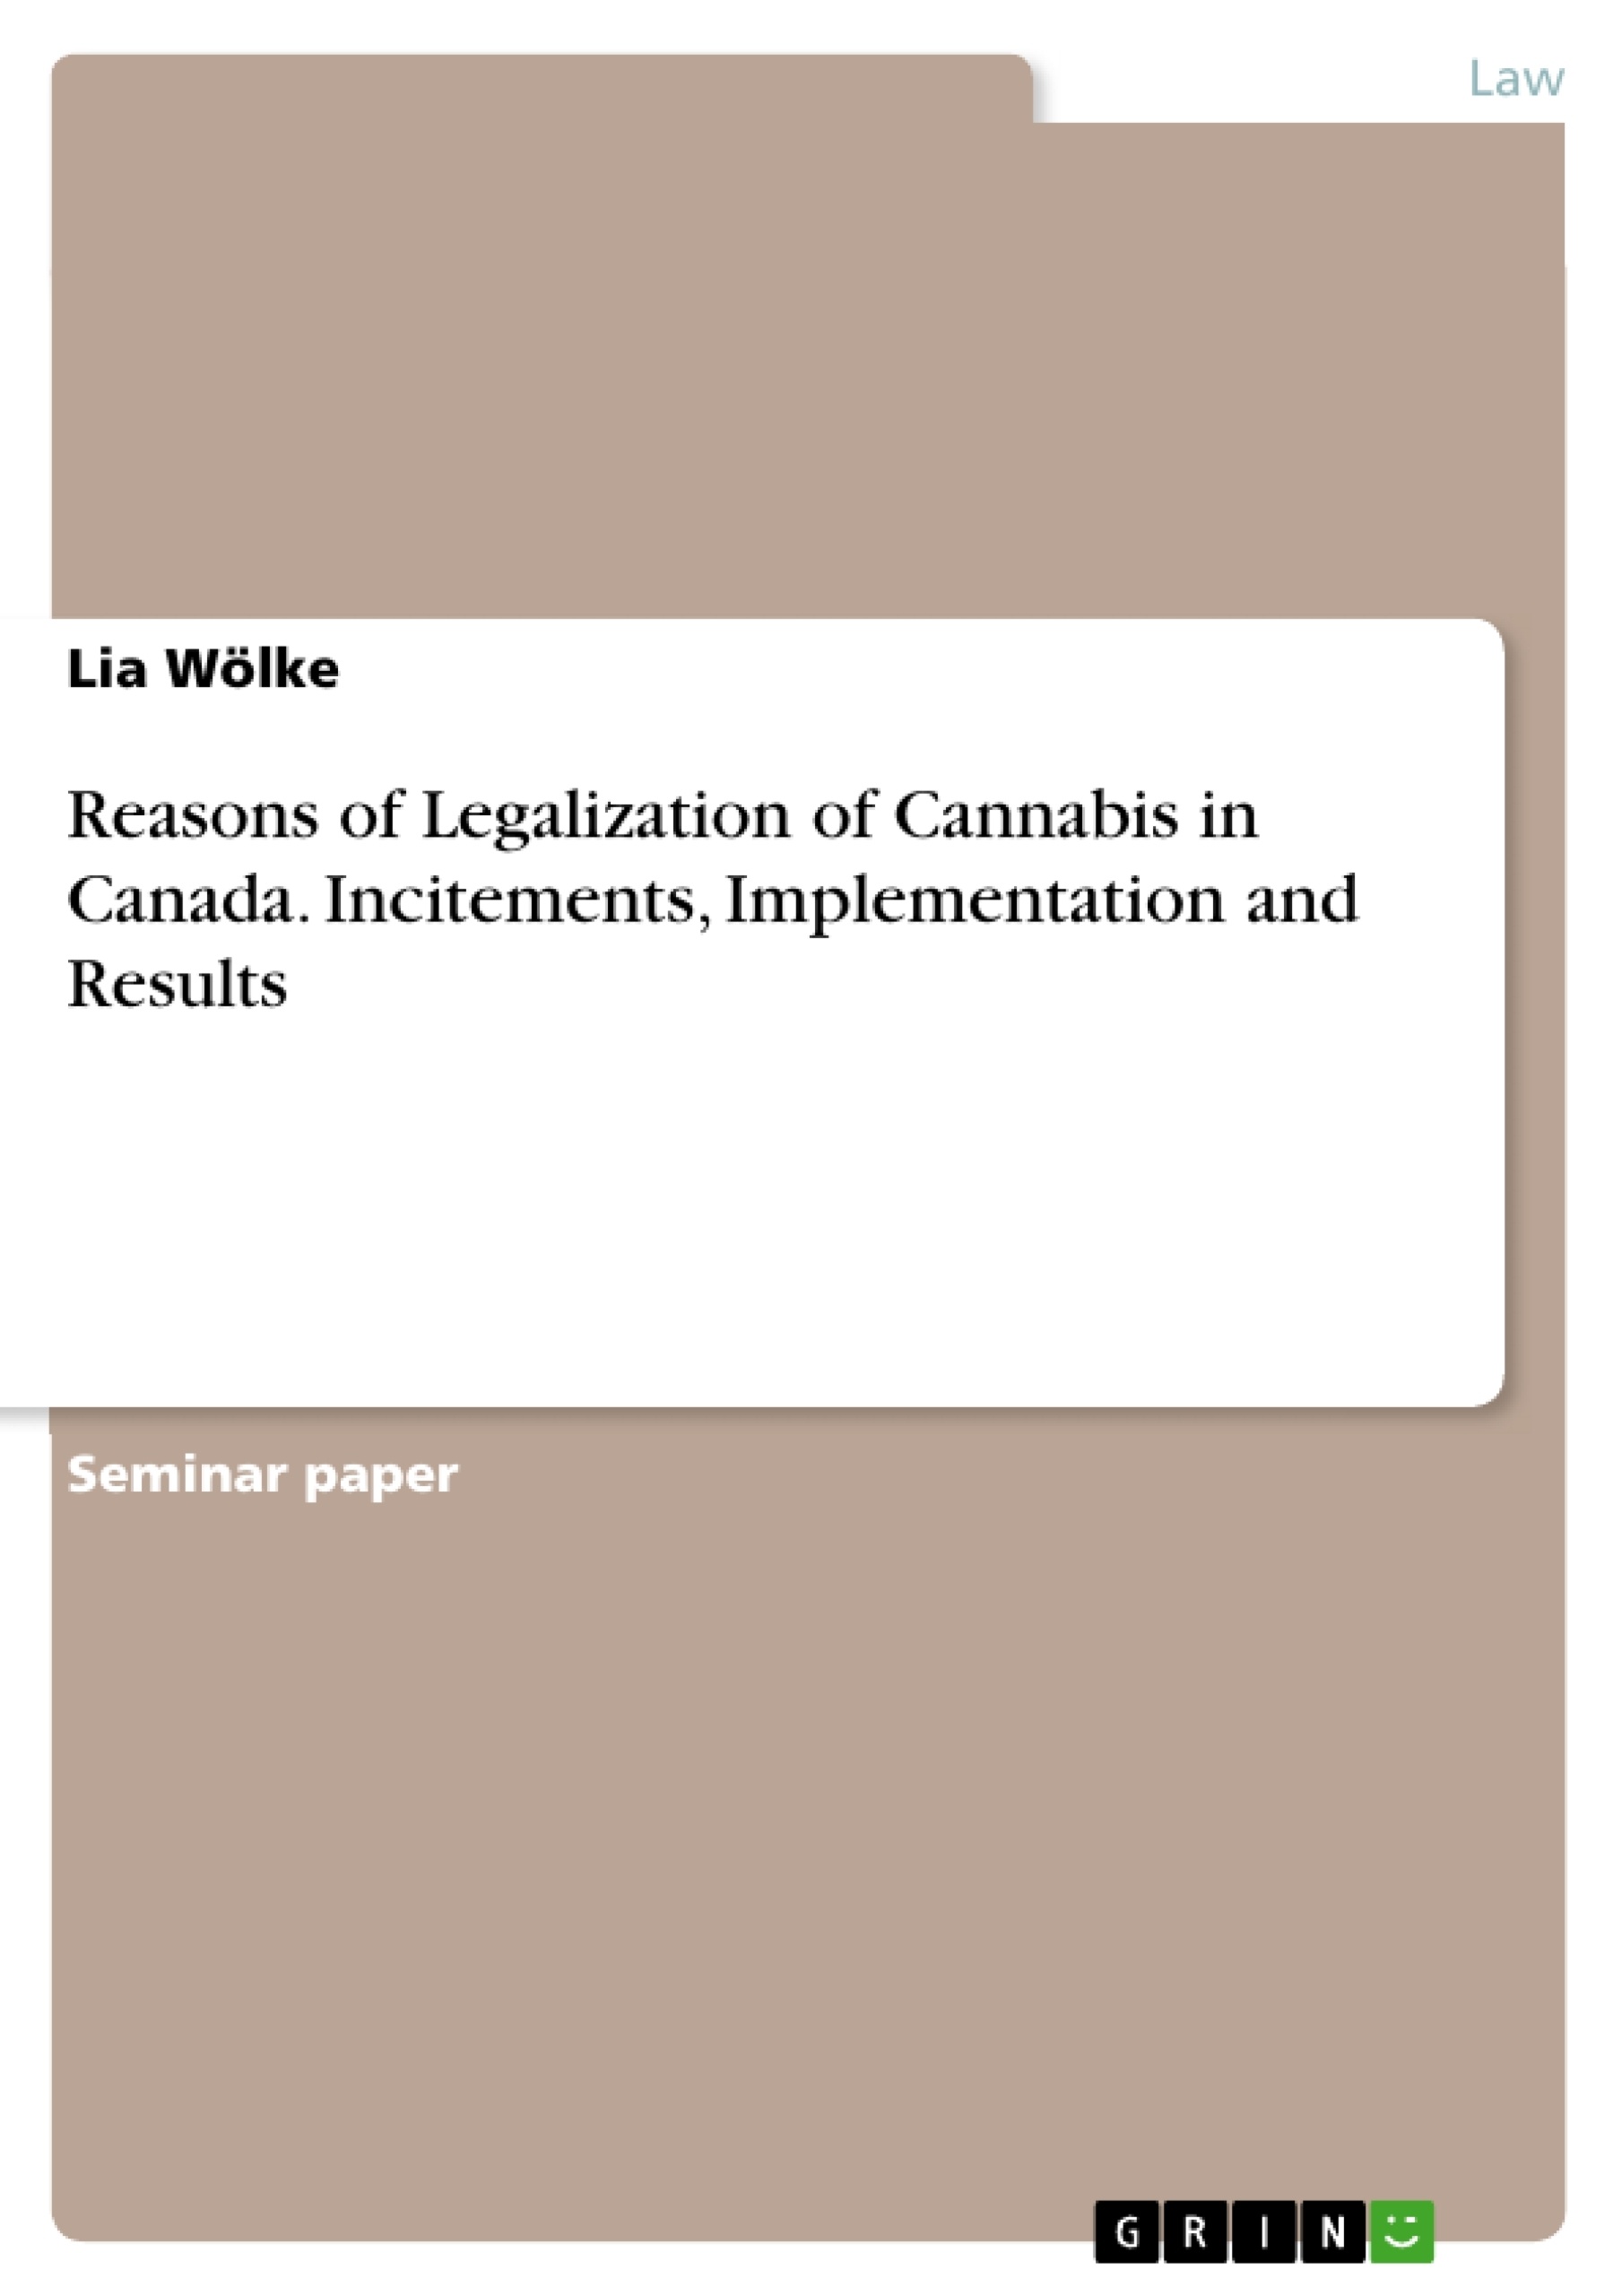 Titre: Reasons of Legalization of Cannabis in Canada. Incitements, Implementation and Results